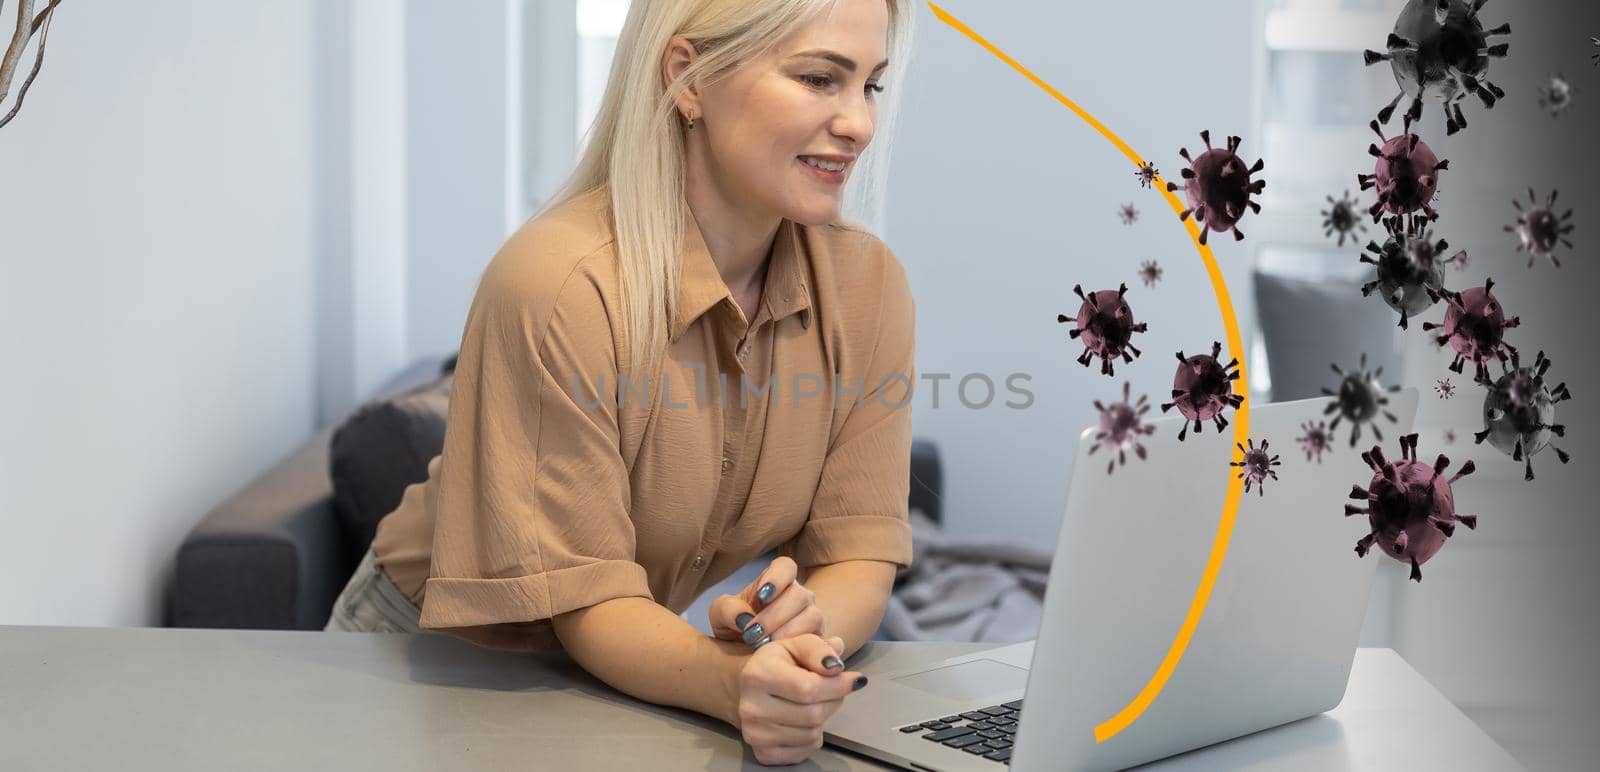 woman is protected from the virus by a dome.